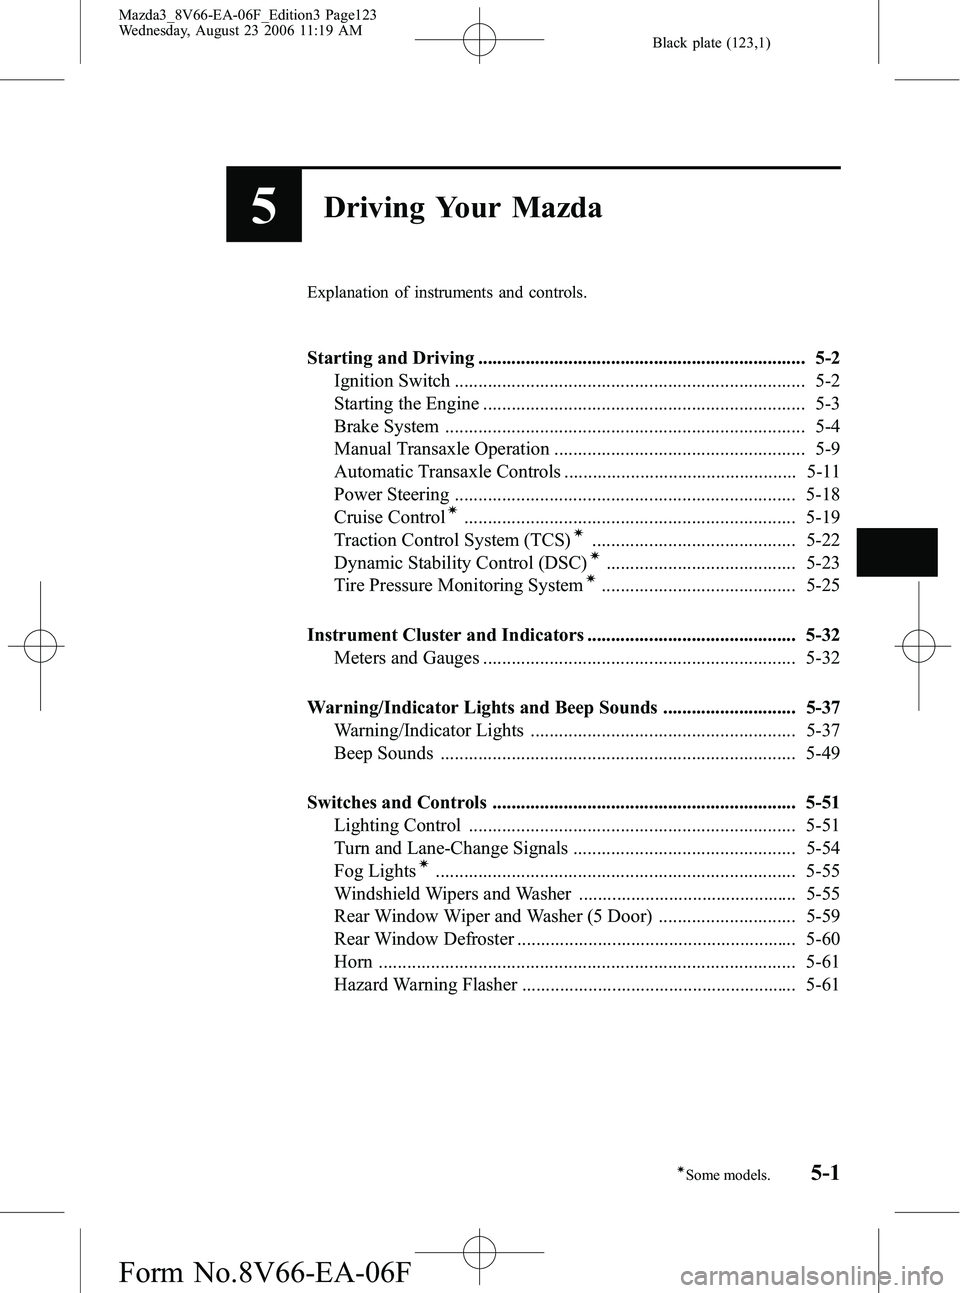 MAZDA MODEL 3 4-DOOR 2007  Owners Manual Black plate (123,1)
5Driving Your Mazda
Explanation of instruments and controls.
Starting and Driving ..................................................................... 5-2Ignition Switch .........